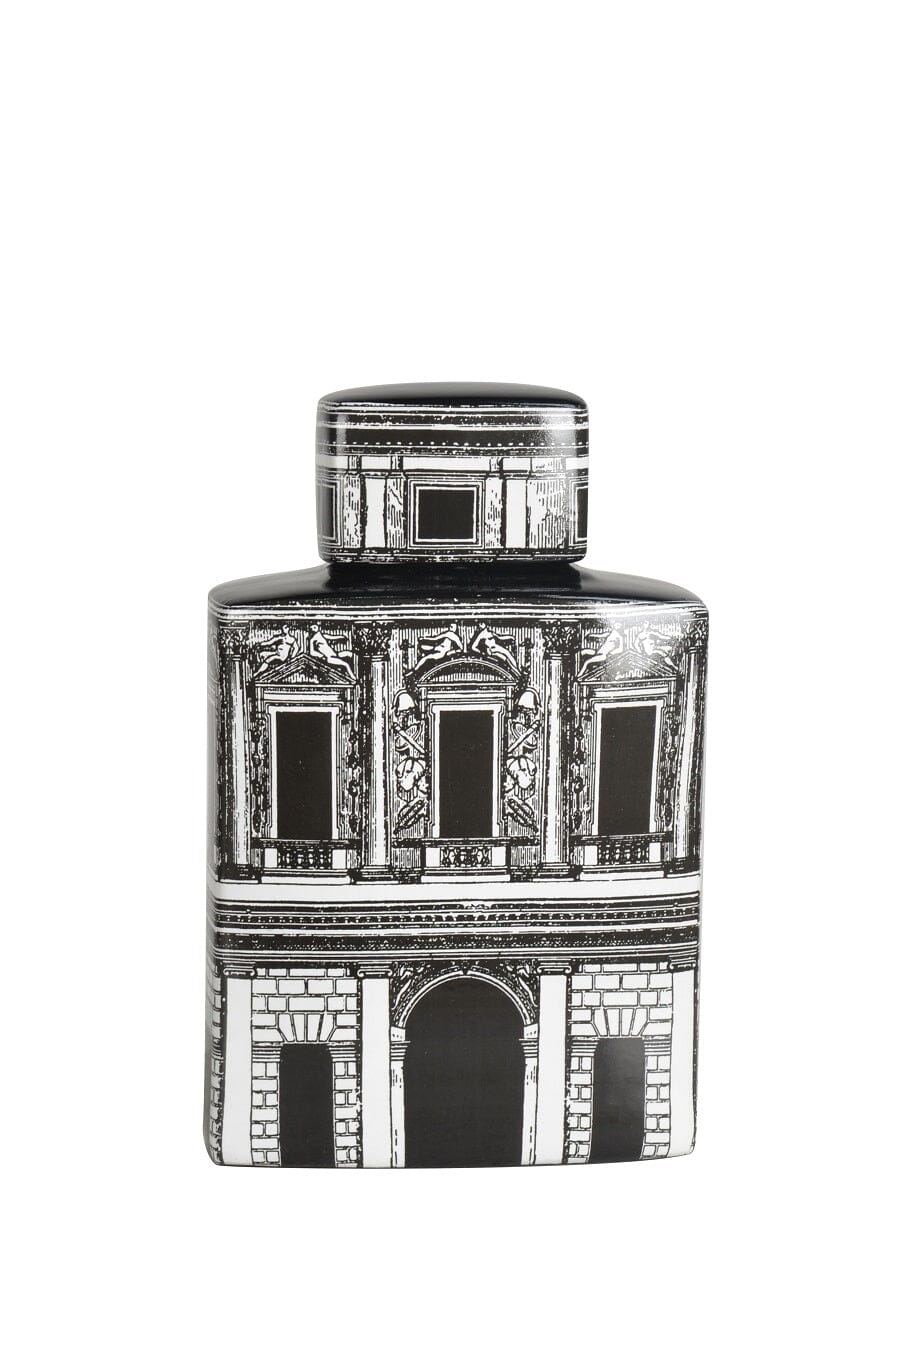 B&W Firenze Bottle Fancy Home Collection Large 